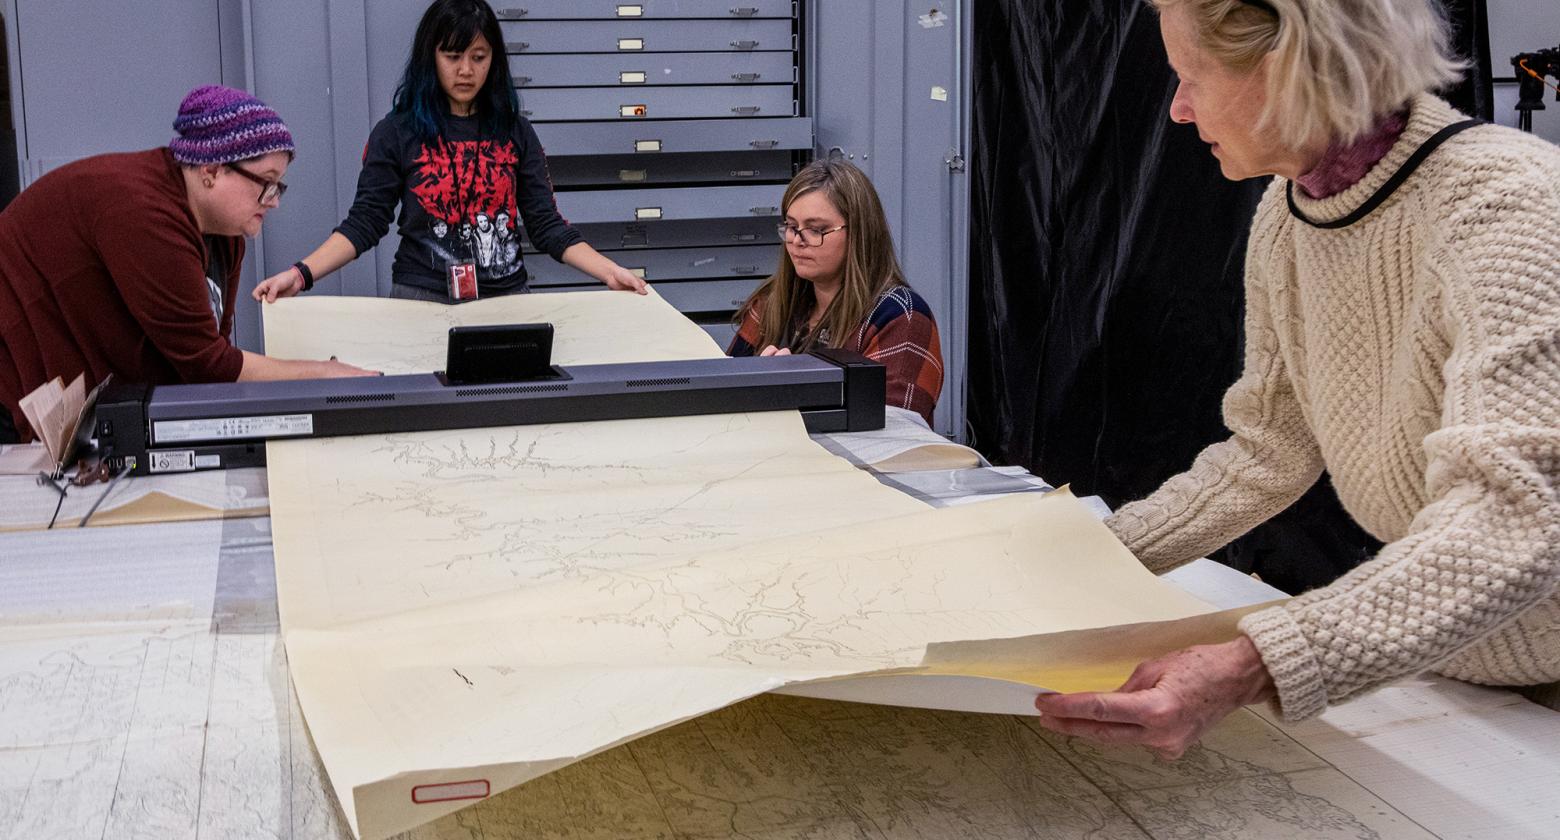 [image] Museum Digitization Project Preserves Archaeological Records